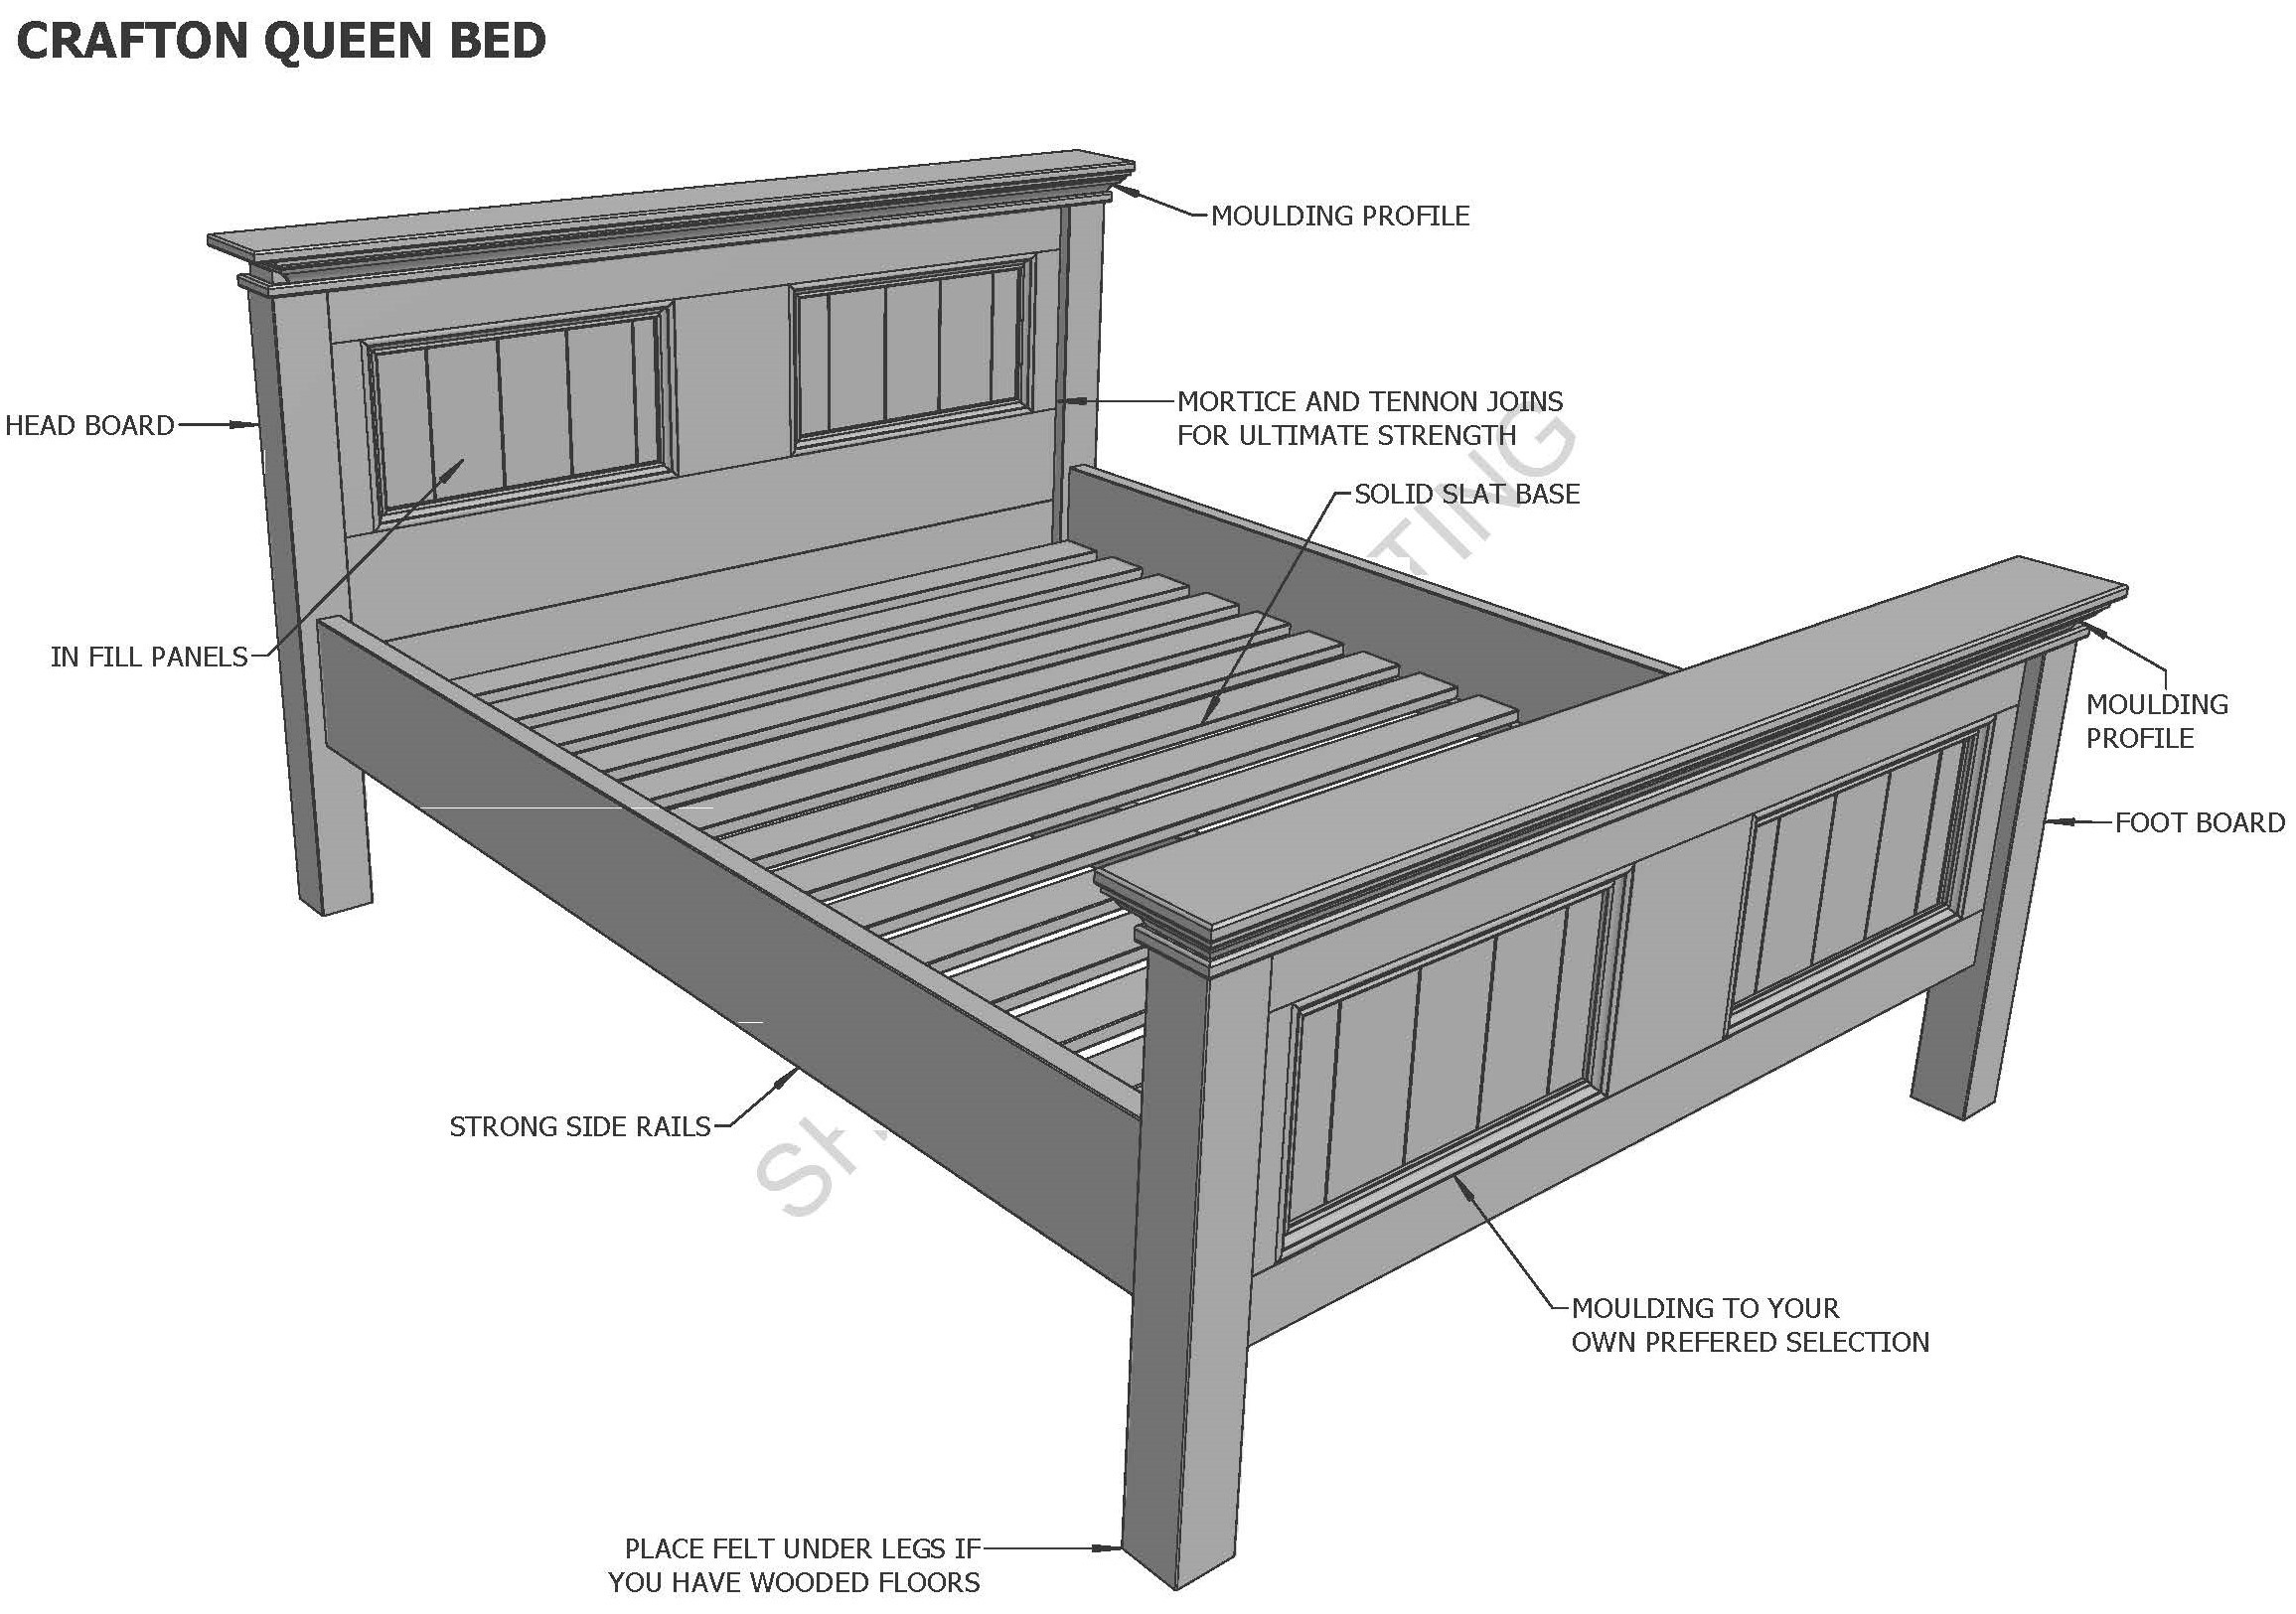 CRAFTON QUEEN BED (Building Plans ONLY)